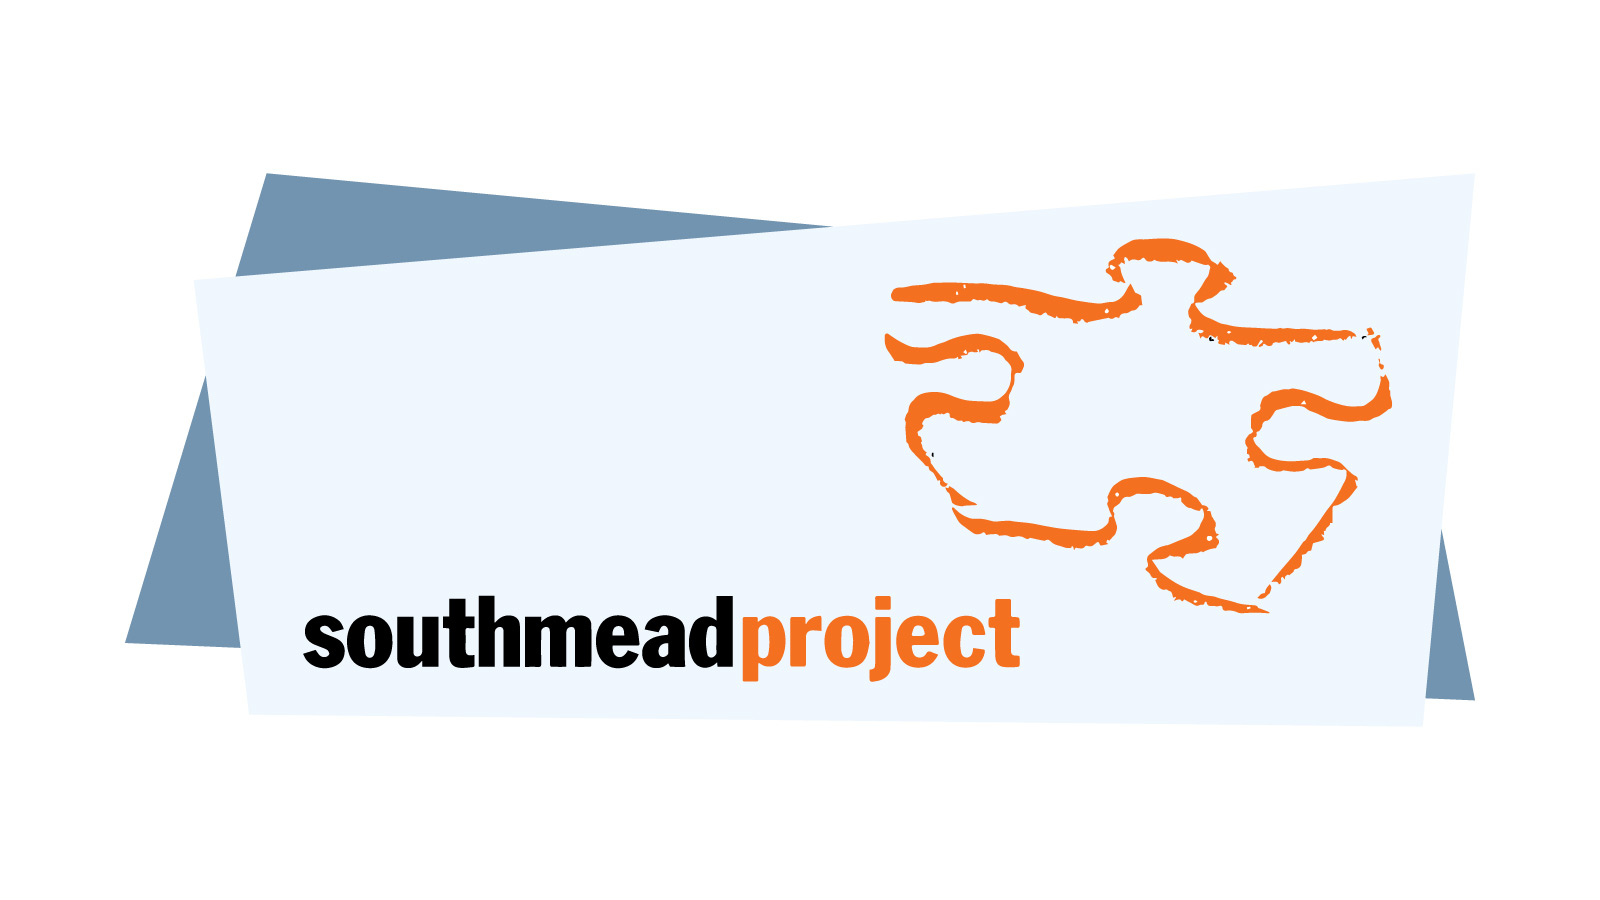 Southmead project